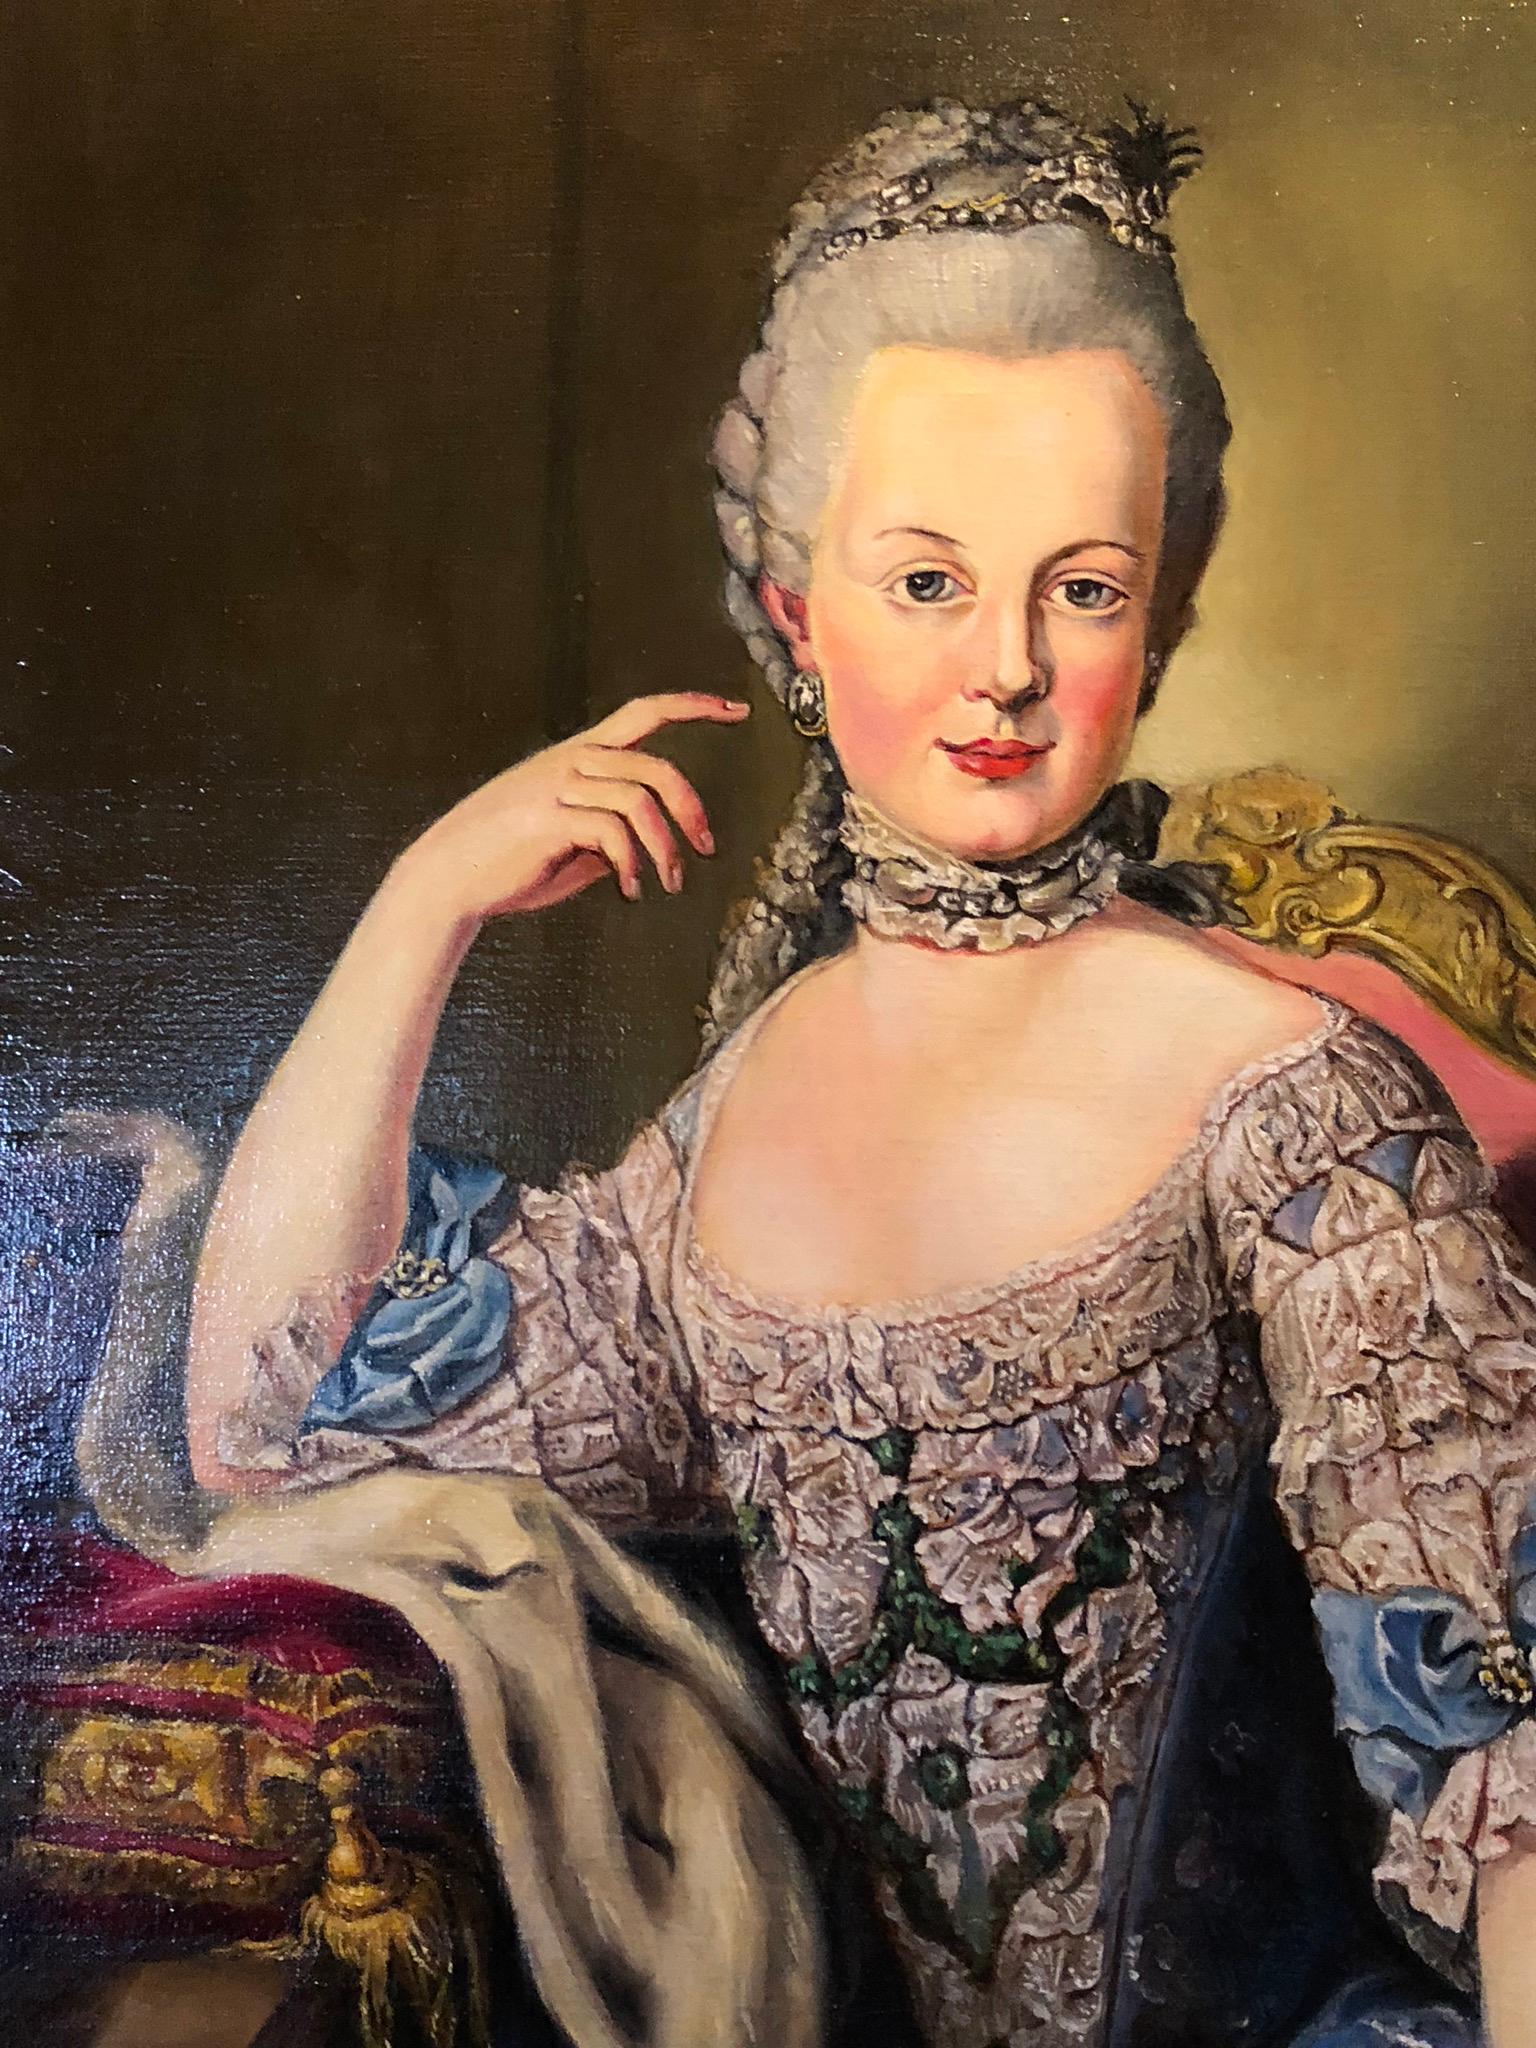 Painted 18th Century Style Engagement Portrait of Archduchess Maria Antonia of Austria  For Sale